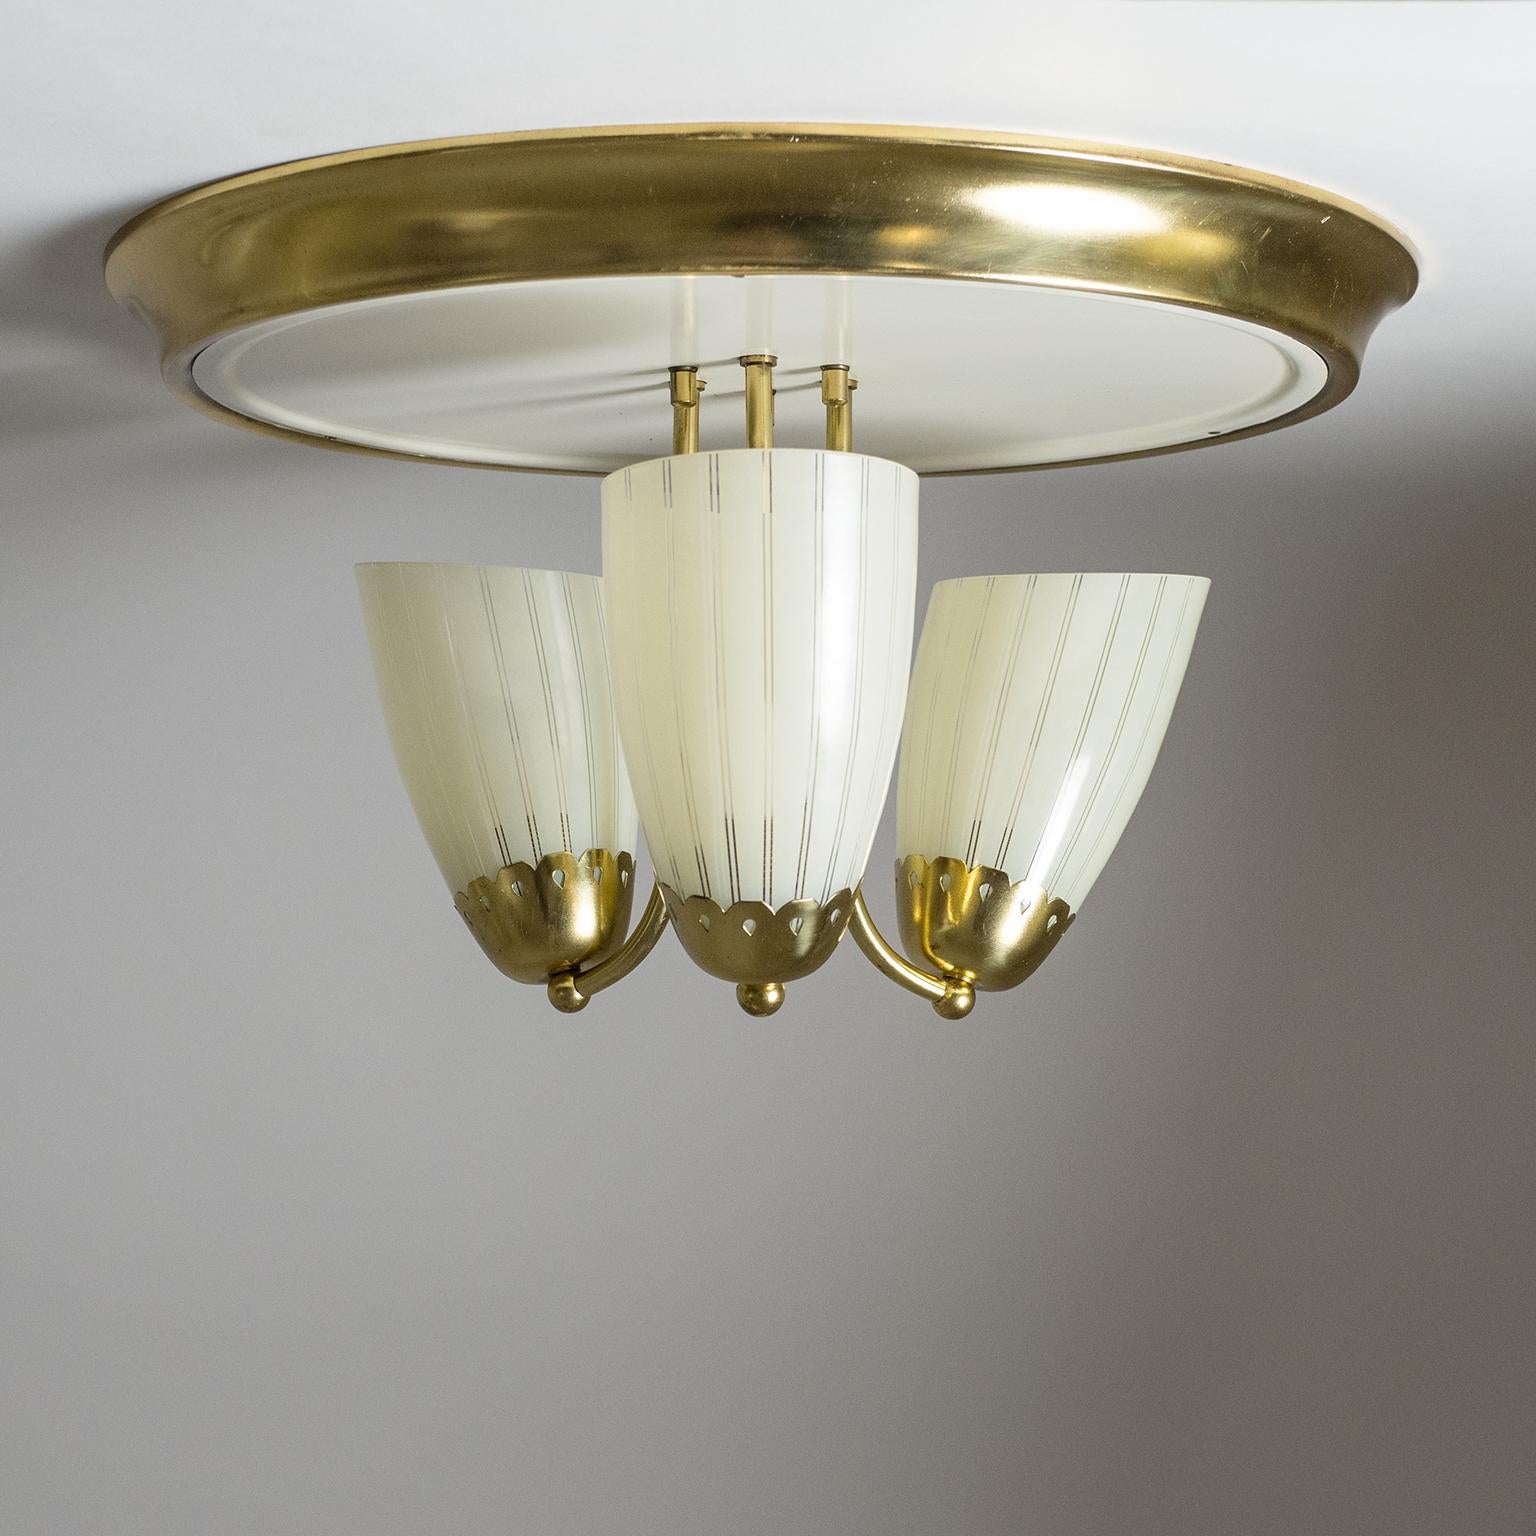 Lovely large brass and glass flush mount from the 1950s. Underneath a large brass and off-white lacquered backplate are three blown glass diffusers with an ivory colored striped enameled decor. Very fine original condition with a light patina on the